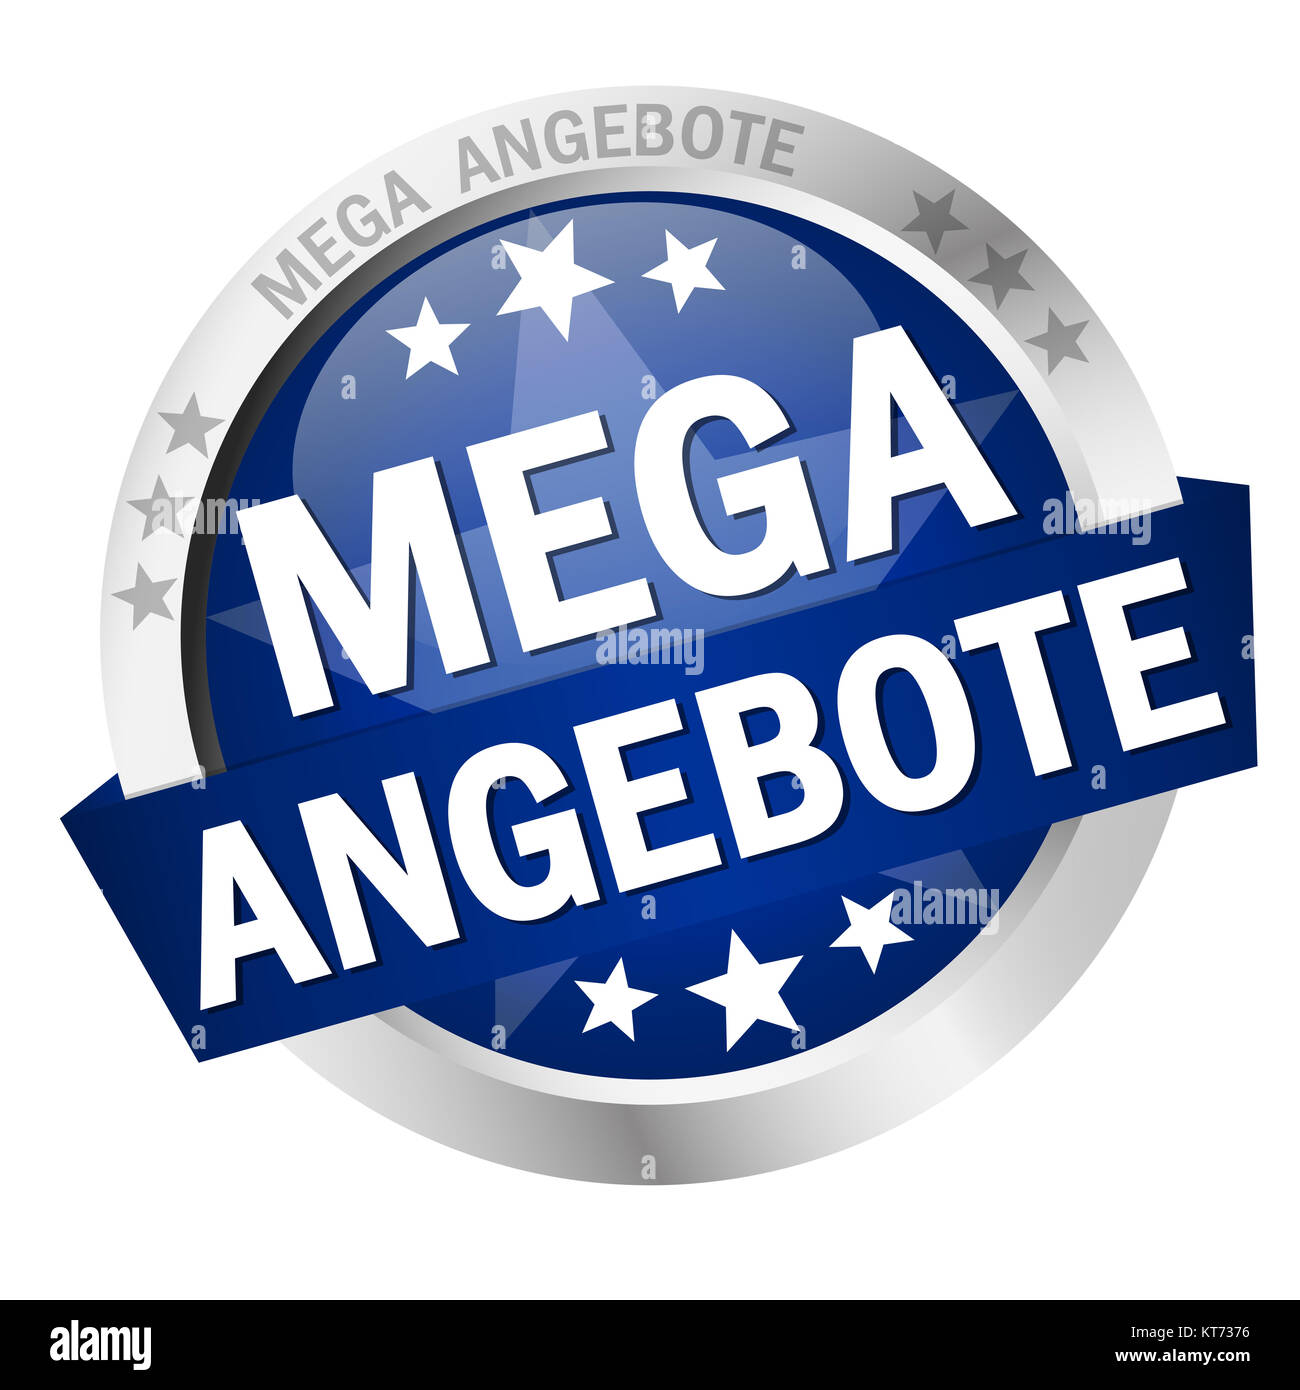 colored button with banner and text Mega Angebote Stock Photo